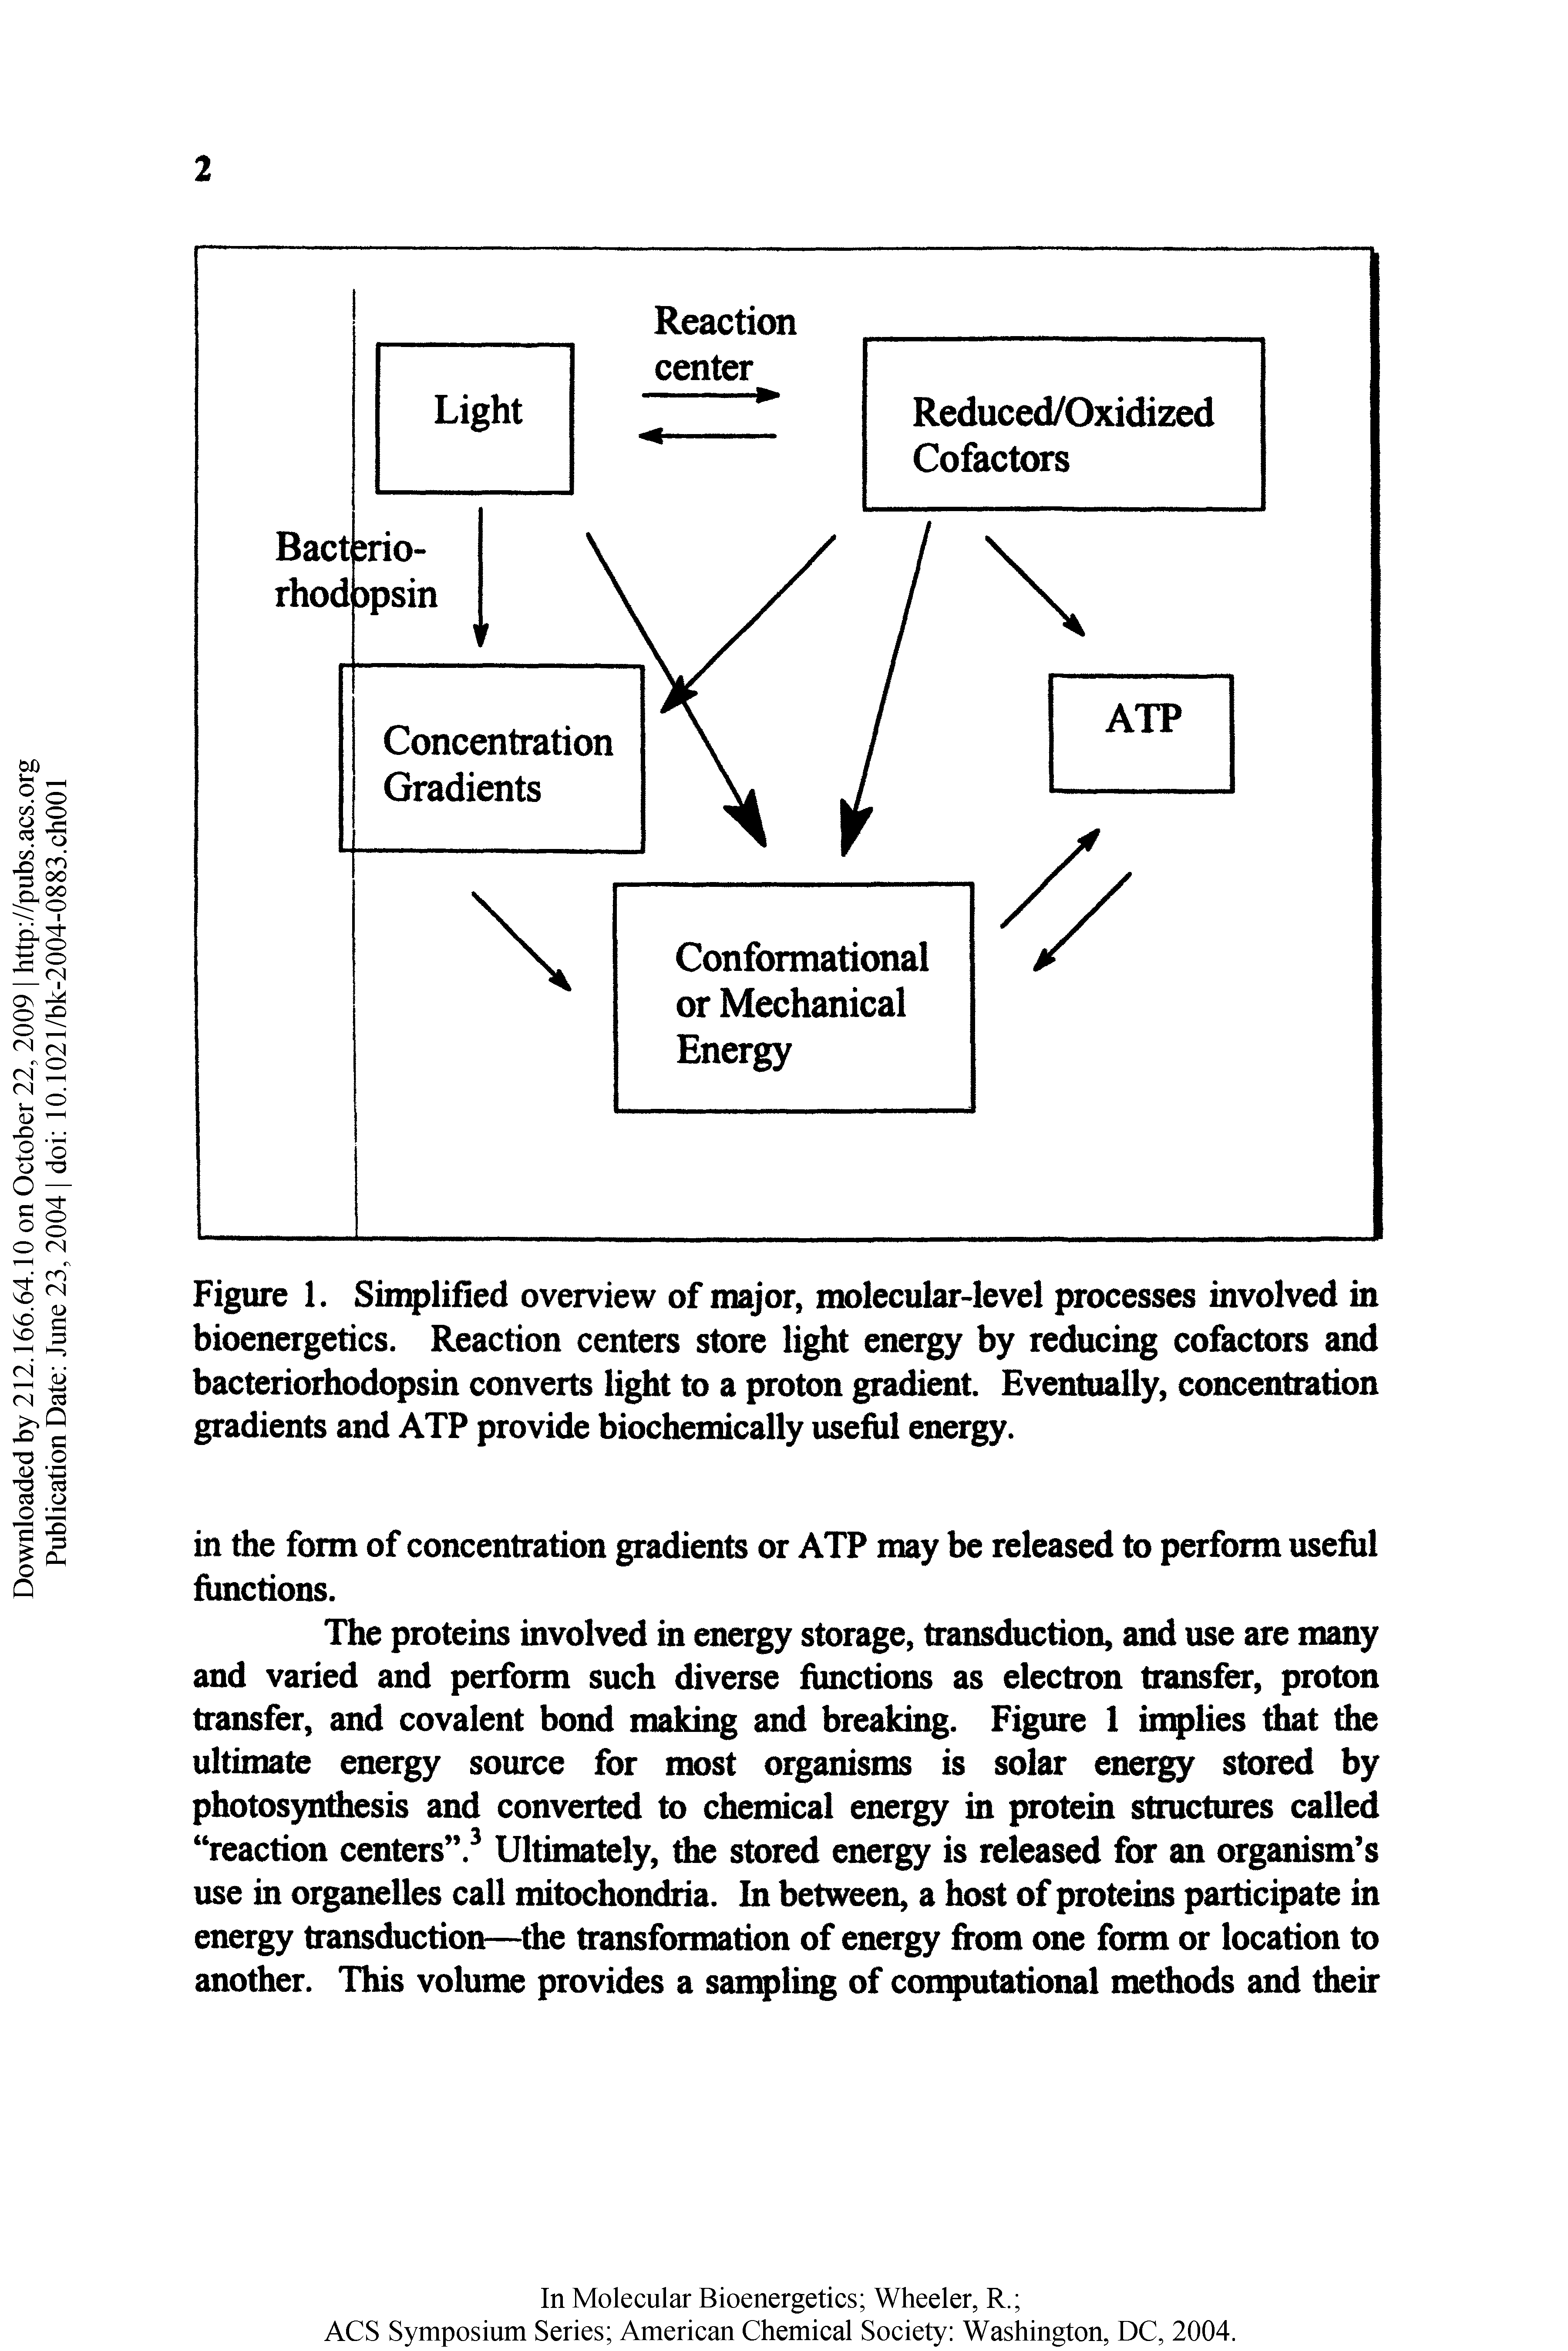 Figure 1. Simplified overview of major, molecular-level processes involved in bioenergetics. Reaction centers store light energy by reducing cofactors and bacteriorhodopsin converts light to a proton gmdient. Eventiially, concentration gradients and ATP provide biochemically useful energy.